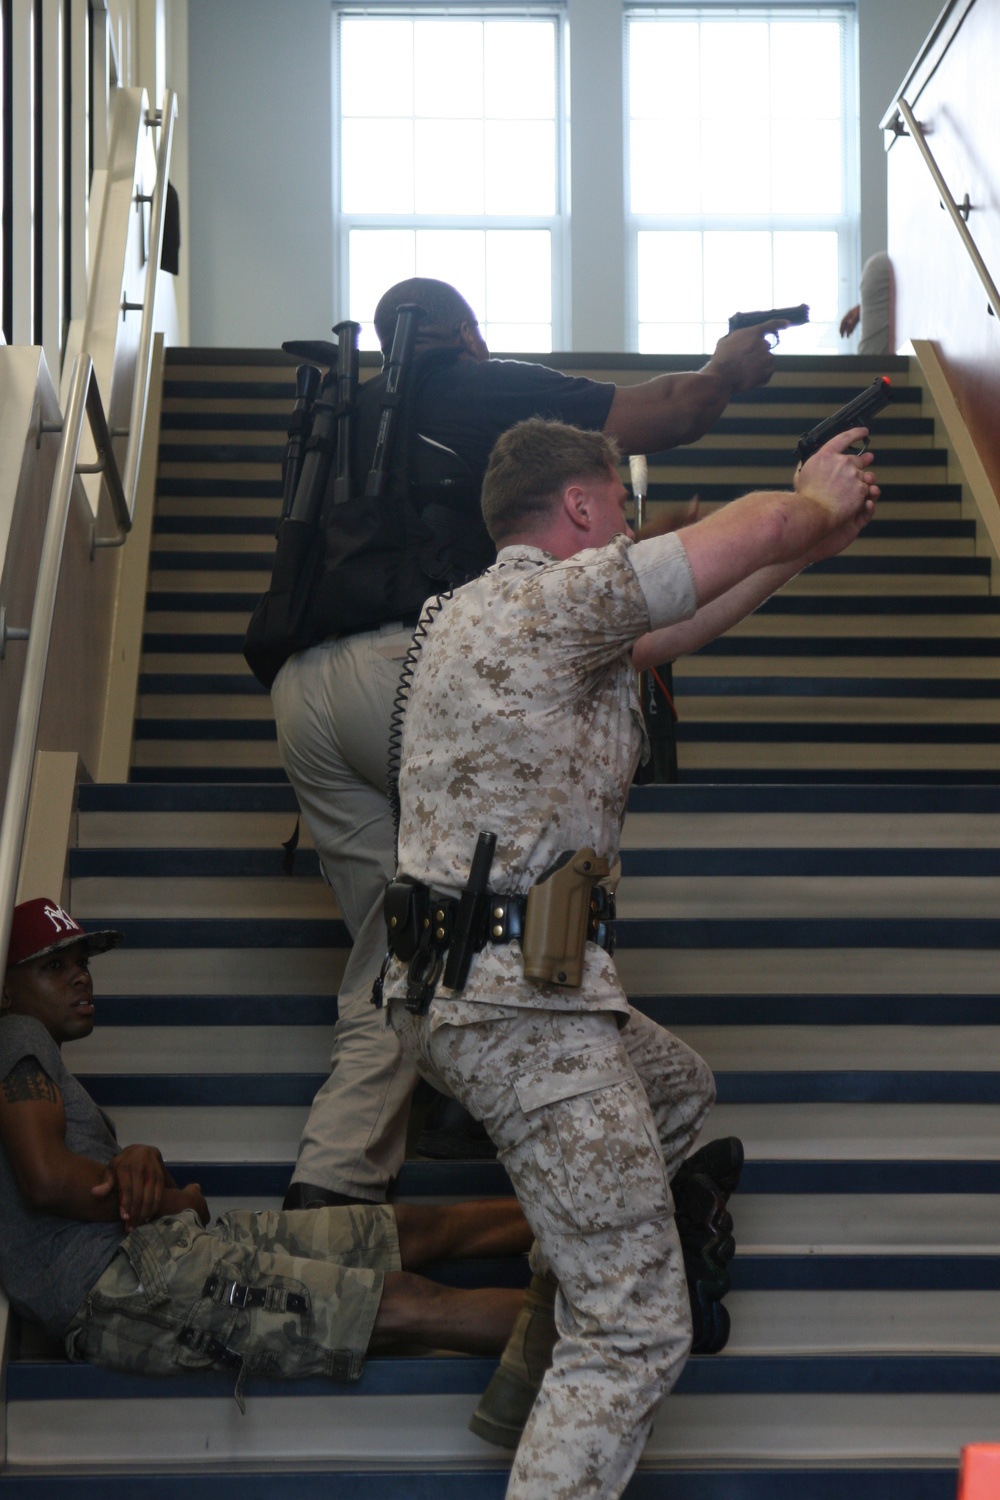 Quantico holds active shooter exercise at Crossroads Elementary school